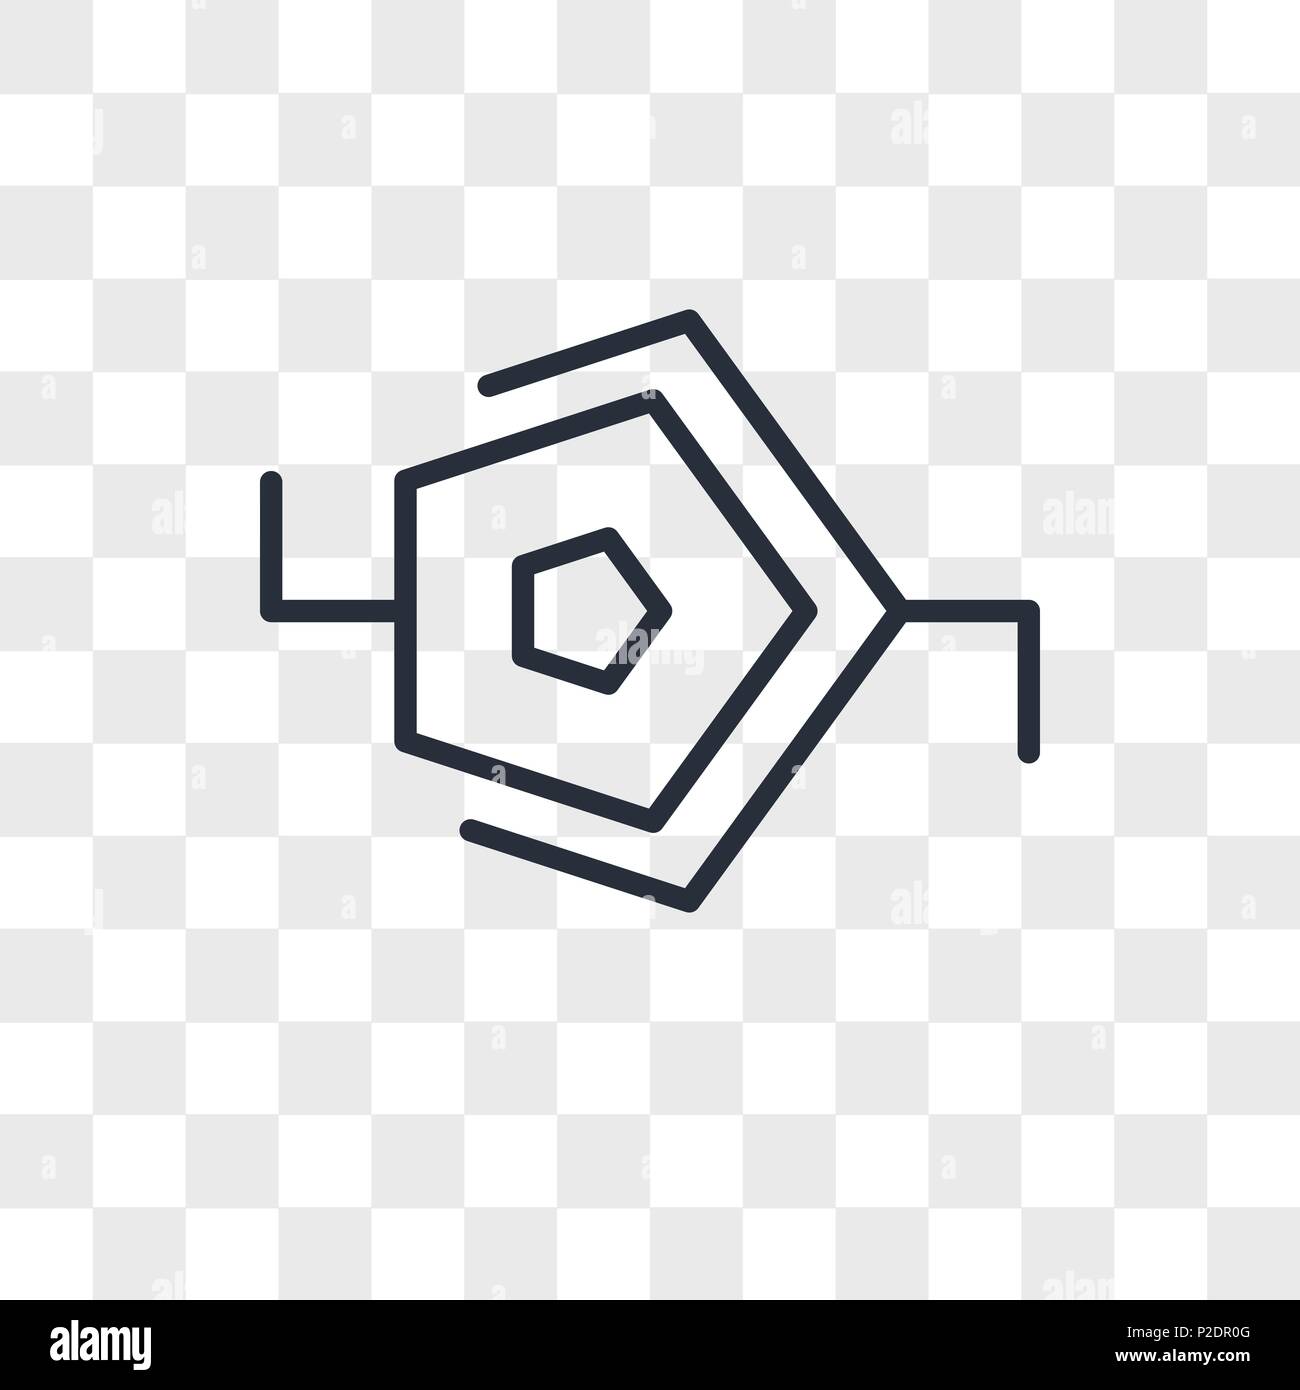 synapse vector icon isolated on transparent background, synapse logo concept Stock Vector